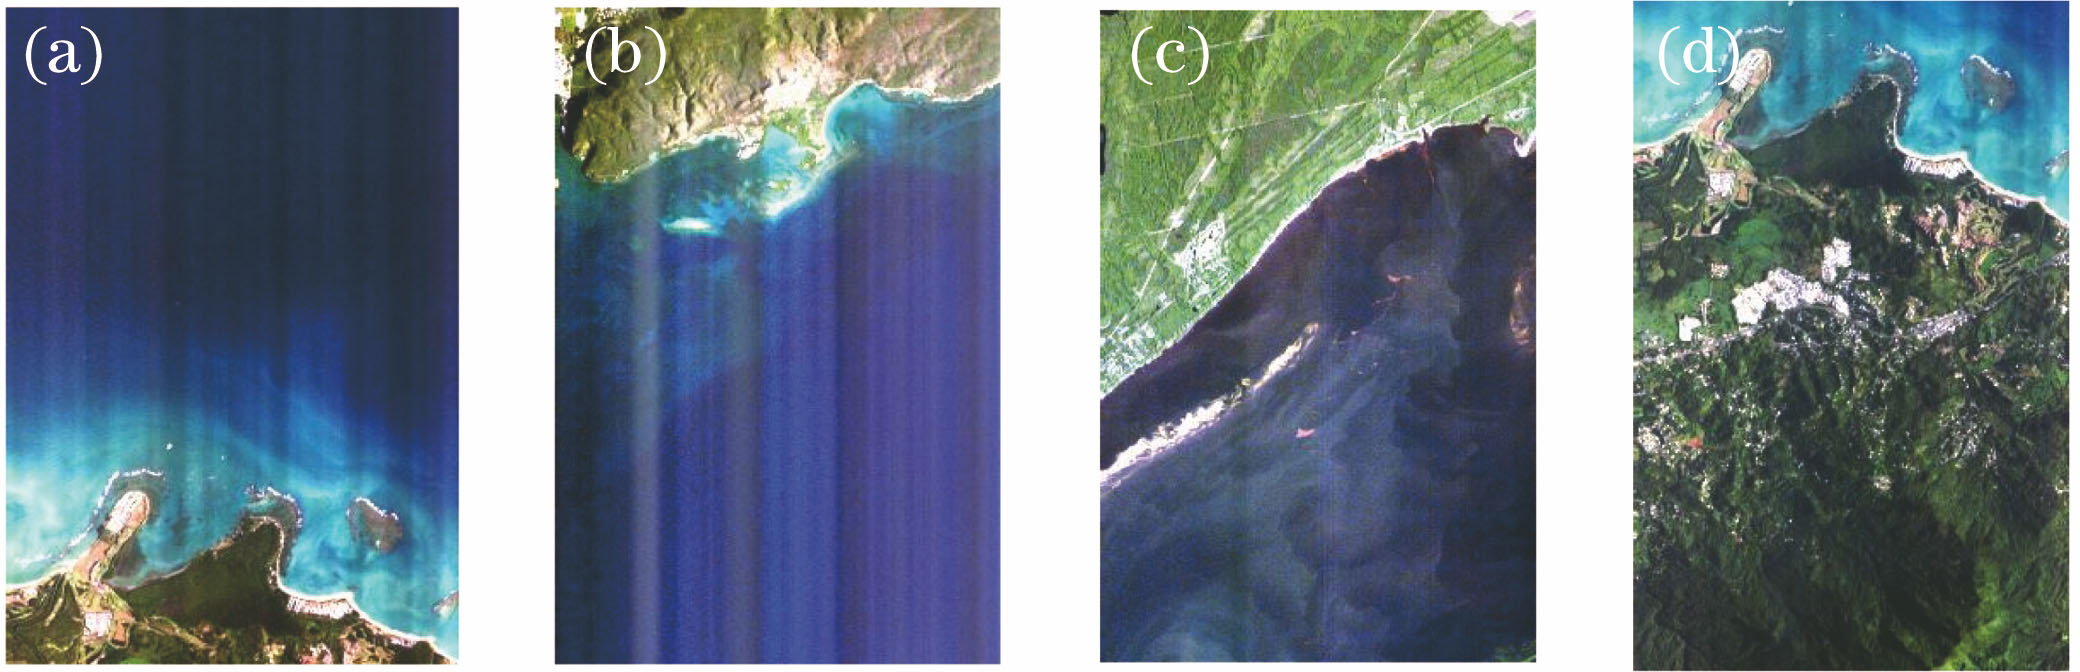 Scene images with features of land and sea. (a) Sample G; (b) sample H; (c) sample I; (d) sample J